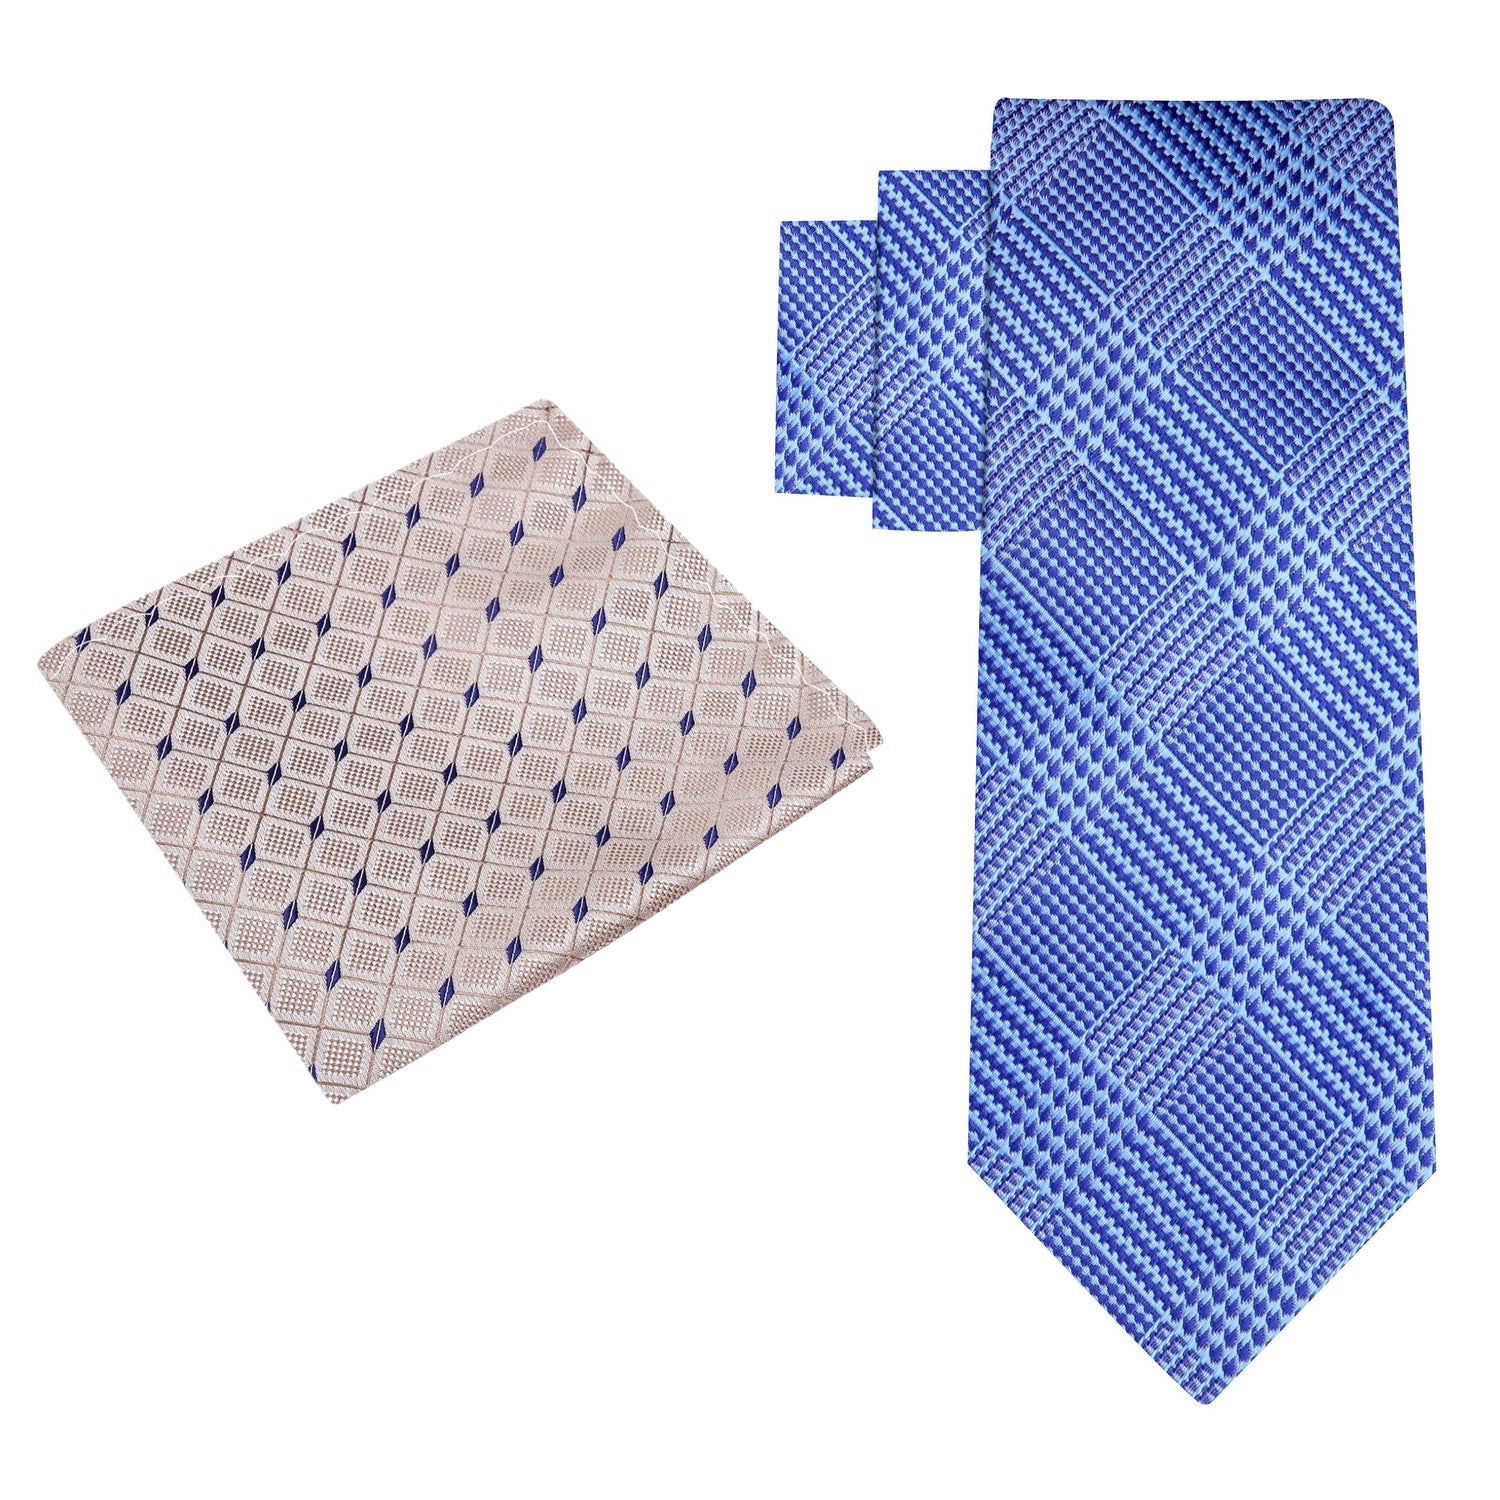 Alt View: Light Blue Siberian Necktie and Accenting Square